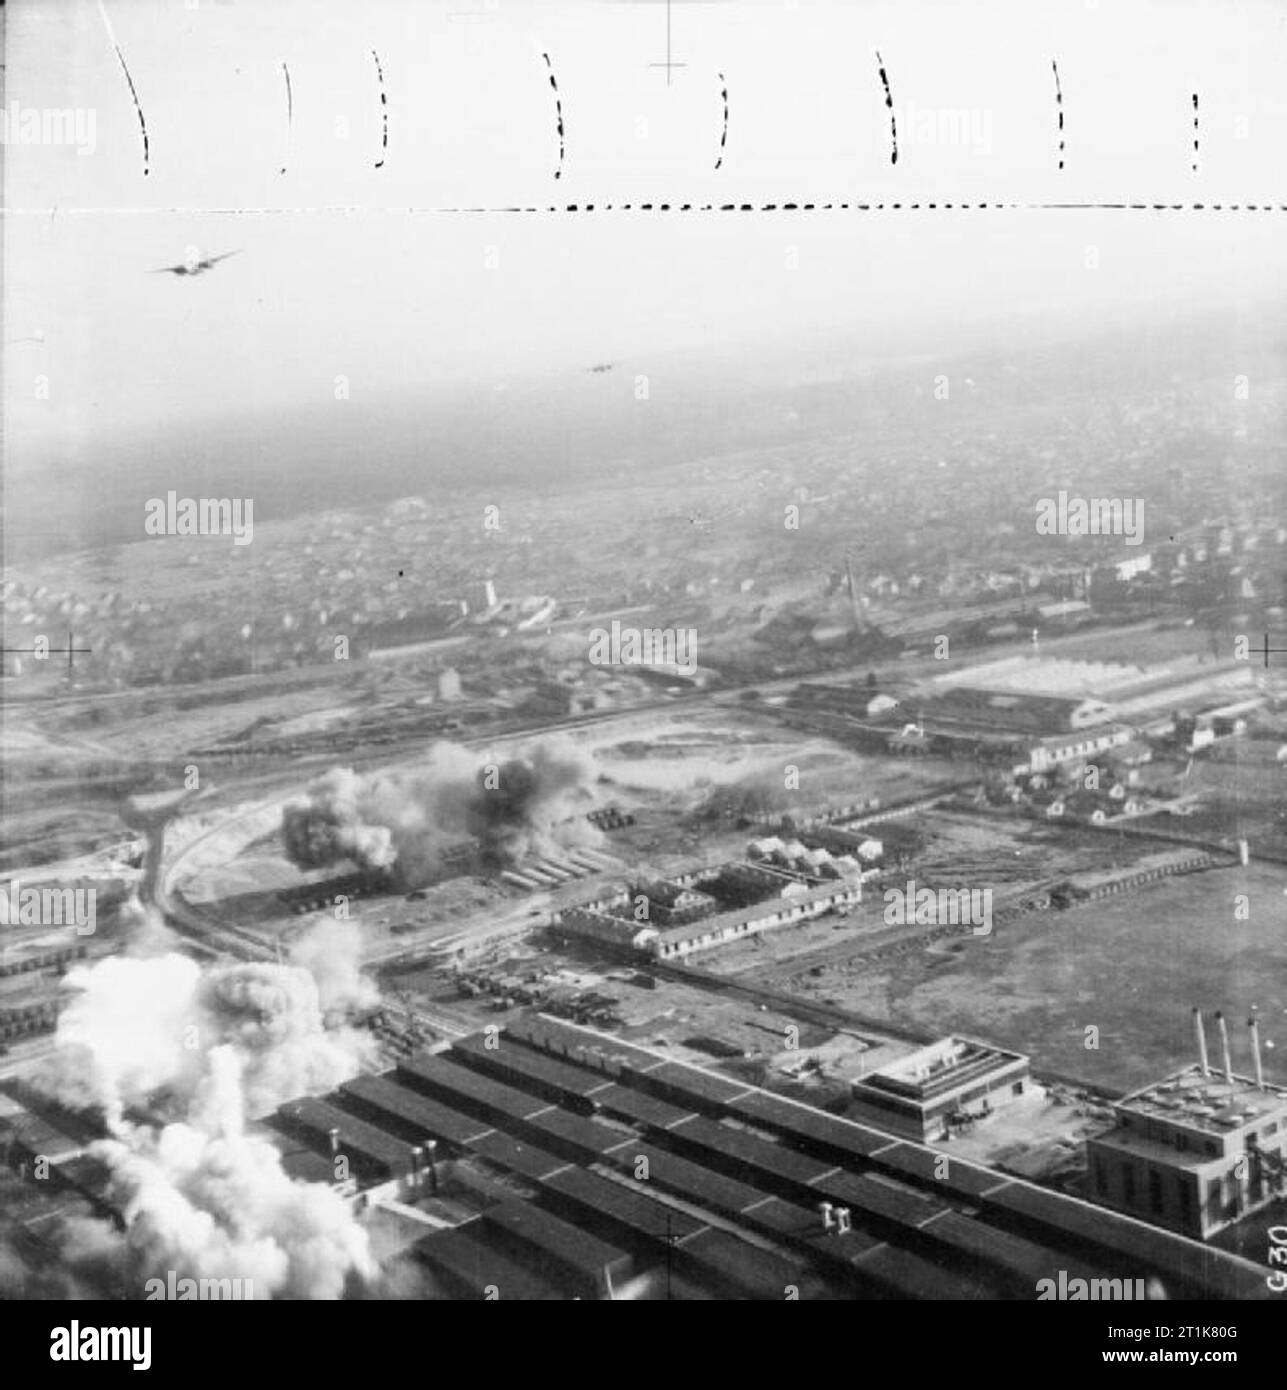 Royal Air Force Bomber Command, 1942-1945. Low-level oblique aerial photograph taken during the course of a daylight attack on the Matford automotive works at Poissy, France, by Douglas Bostons of Nos. 88 and 226 Squadrons RAF. This special raid, led by the Commanding Officer of 226 Squadron, Wing Commander V S Butler, opened the 1942 day-bombing offensive. 12 aircraft were despatched, of which 8 successfully bombed the target. Here, two Bostons can be seen running in towards the target as bombs fall on lines of finished lorries, and smoke from exploding bombs pours from the factory roof (lowe Stock Photo